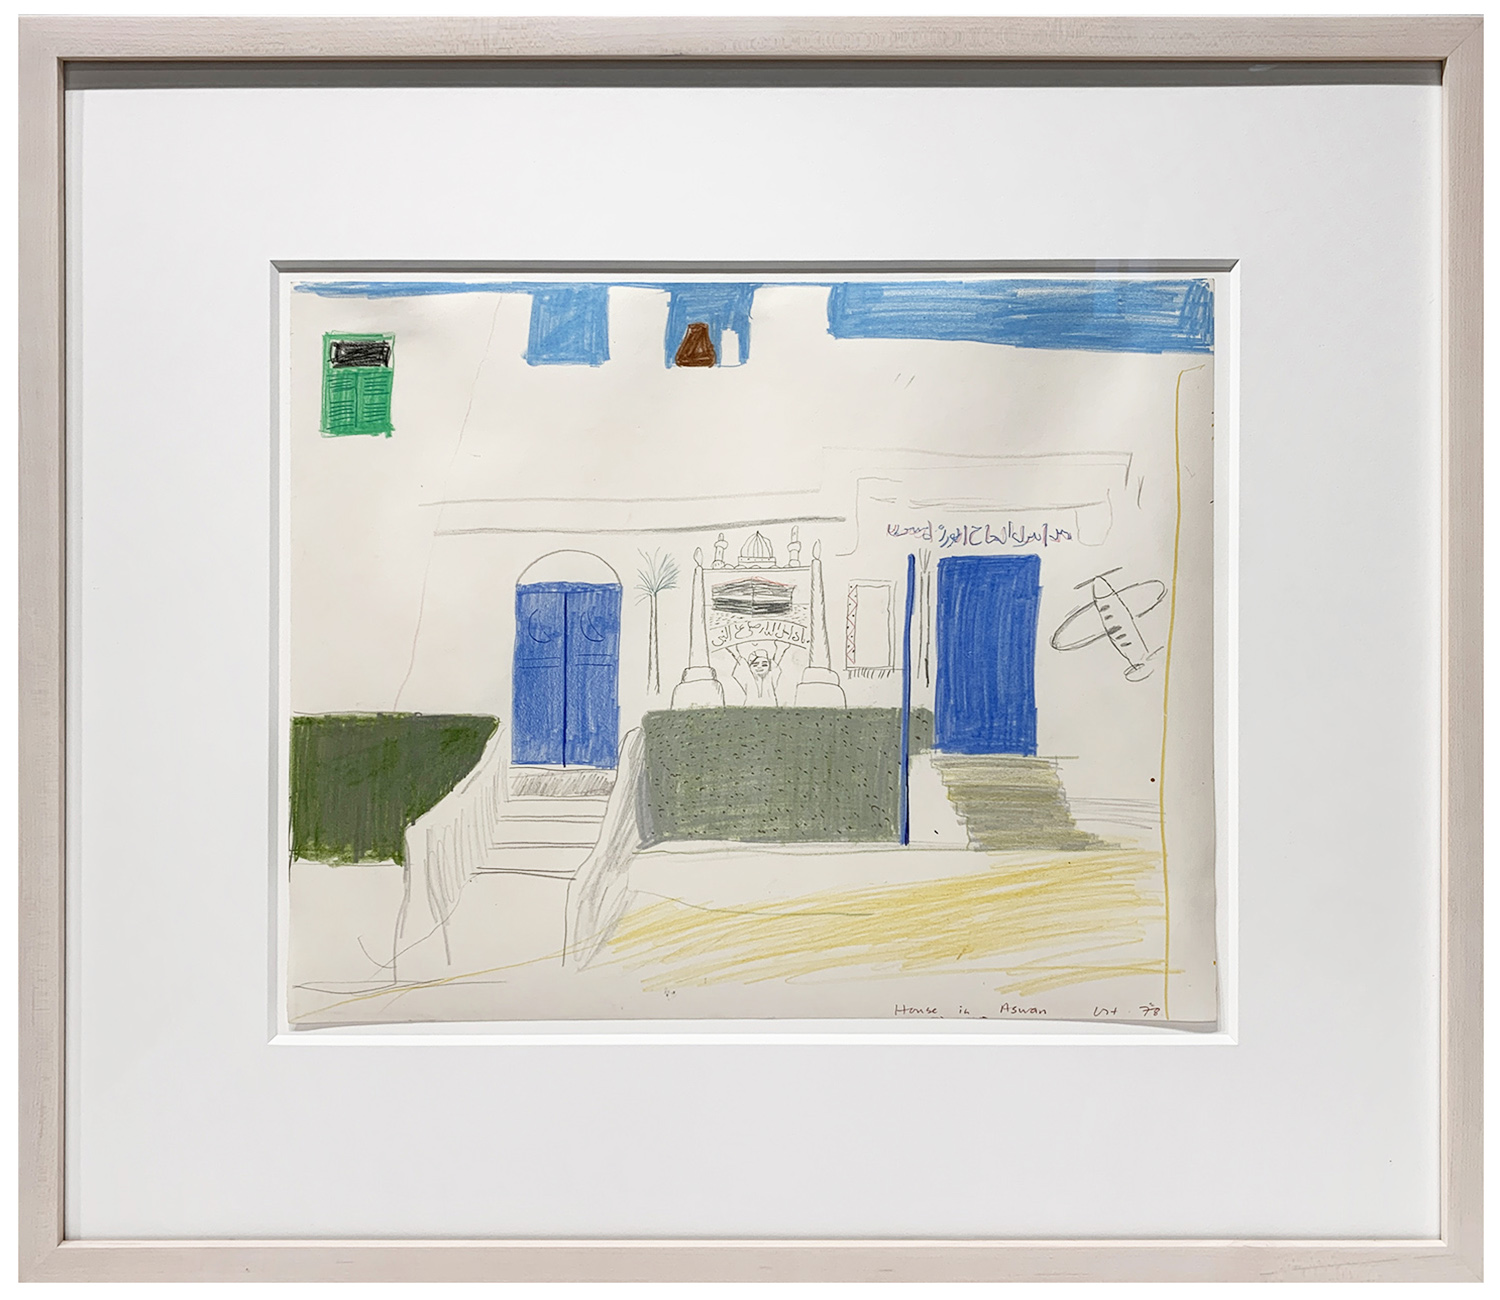 David Hockney colorful drawing of man in front of house in Aswan